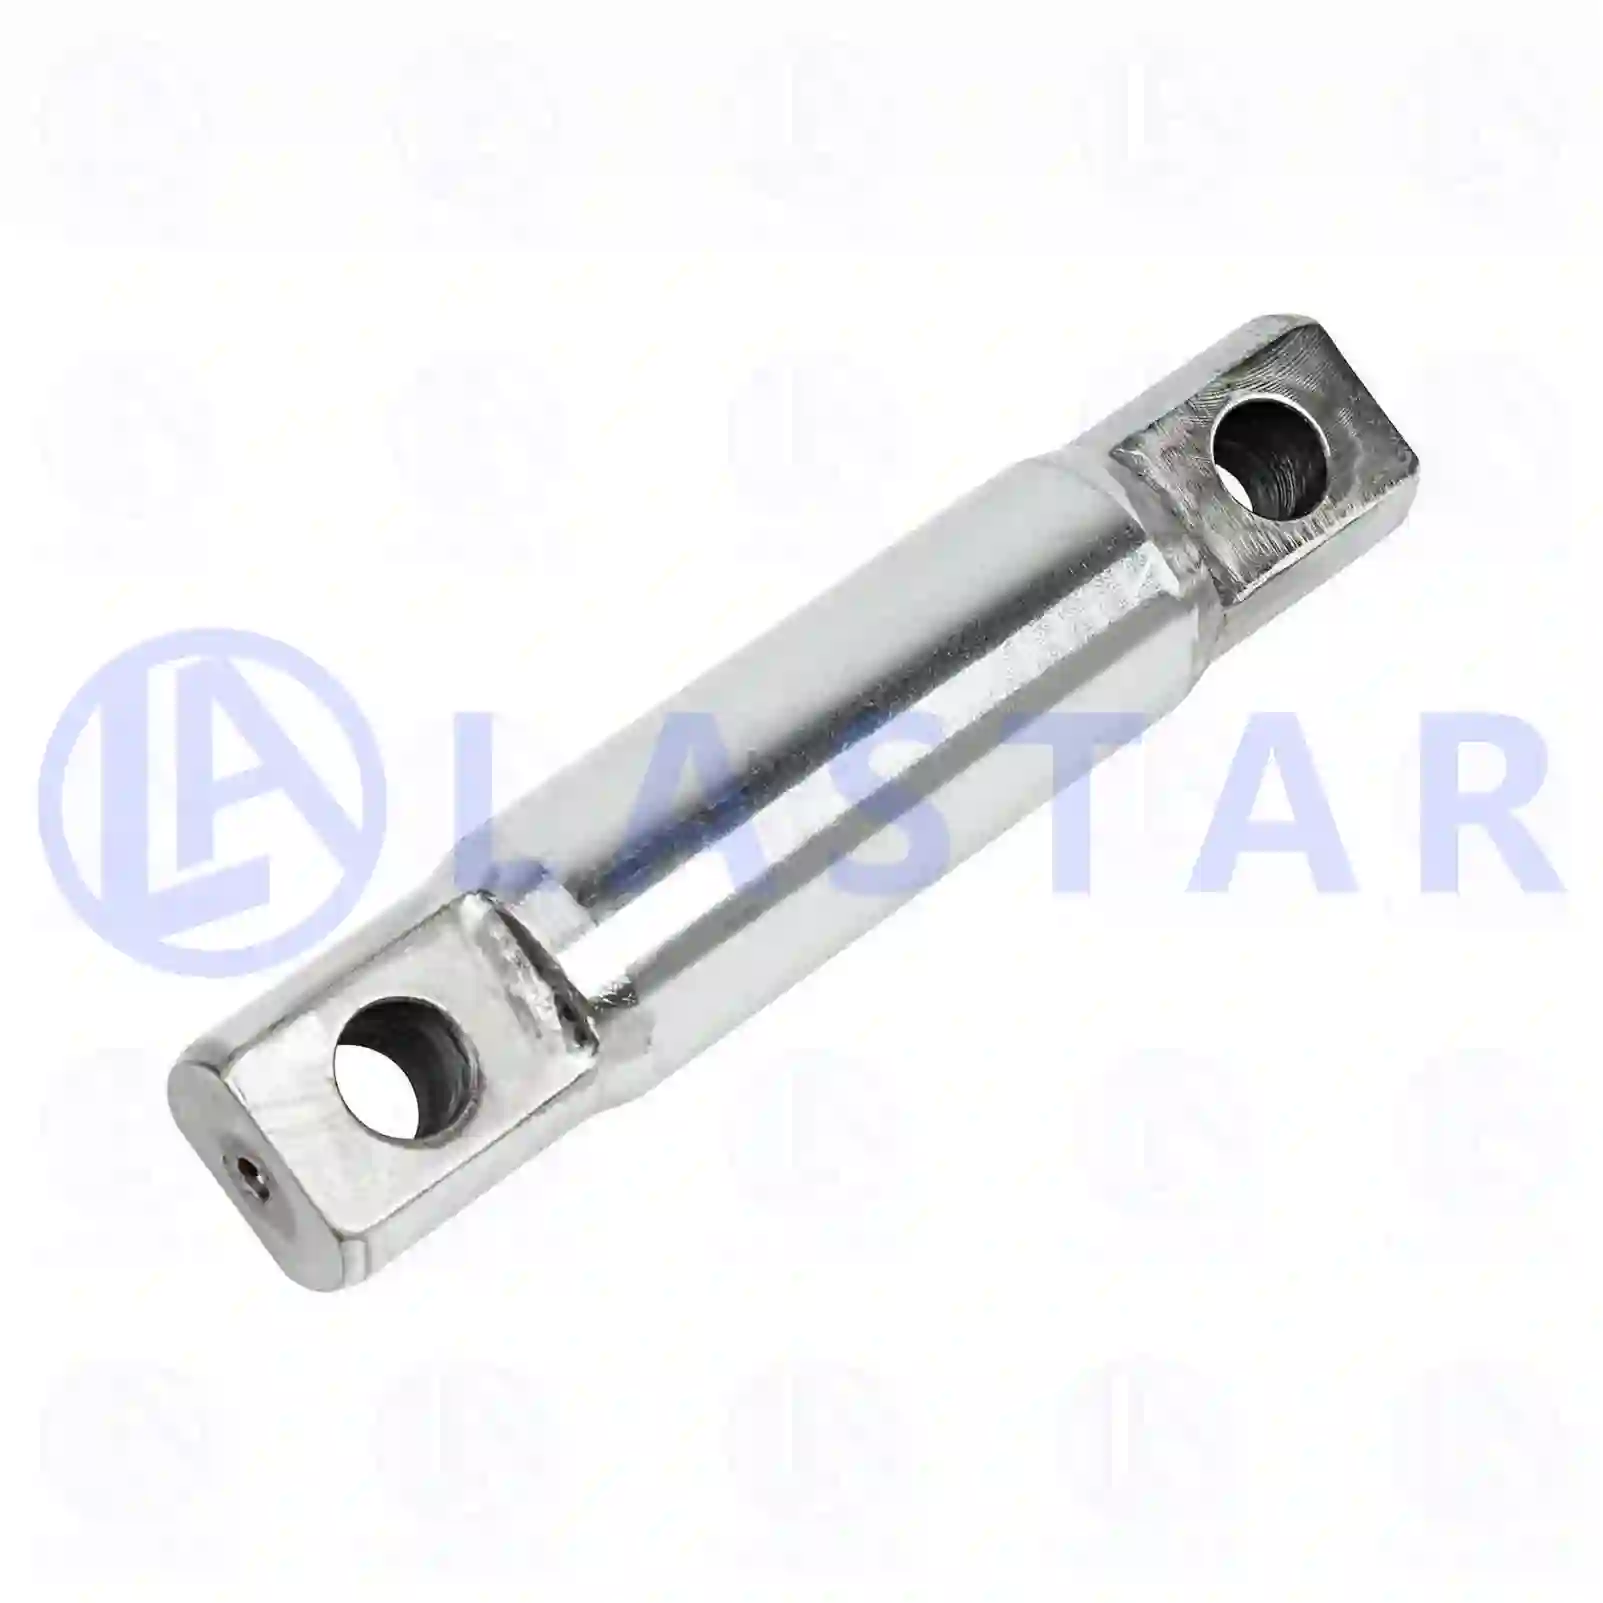 Release shaft, 77721951, 1615935, 42537411, 81305300037, 0002540907, 2V5141327, ZG30369-0008 ||  77721951 Lastar Spare Part | Truck Spare Parts, Auotomotive Spare Parts Release shaft, 77721951, 1615935, 42537411, 81305300037, 0002540907, 2V5141327, ZG30369-0008 ||  77721951 Lastar Spare Part | Truck Spare Parts, Auotomotive Spare Parts